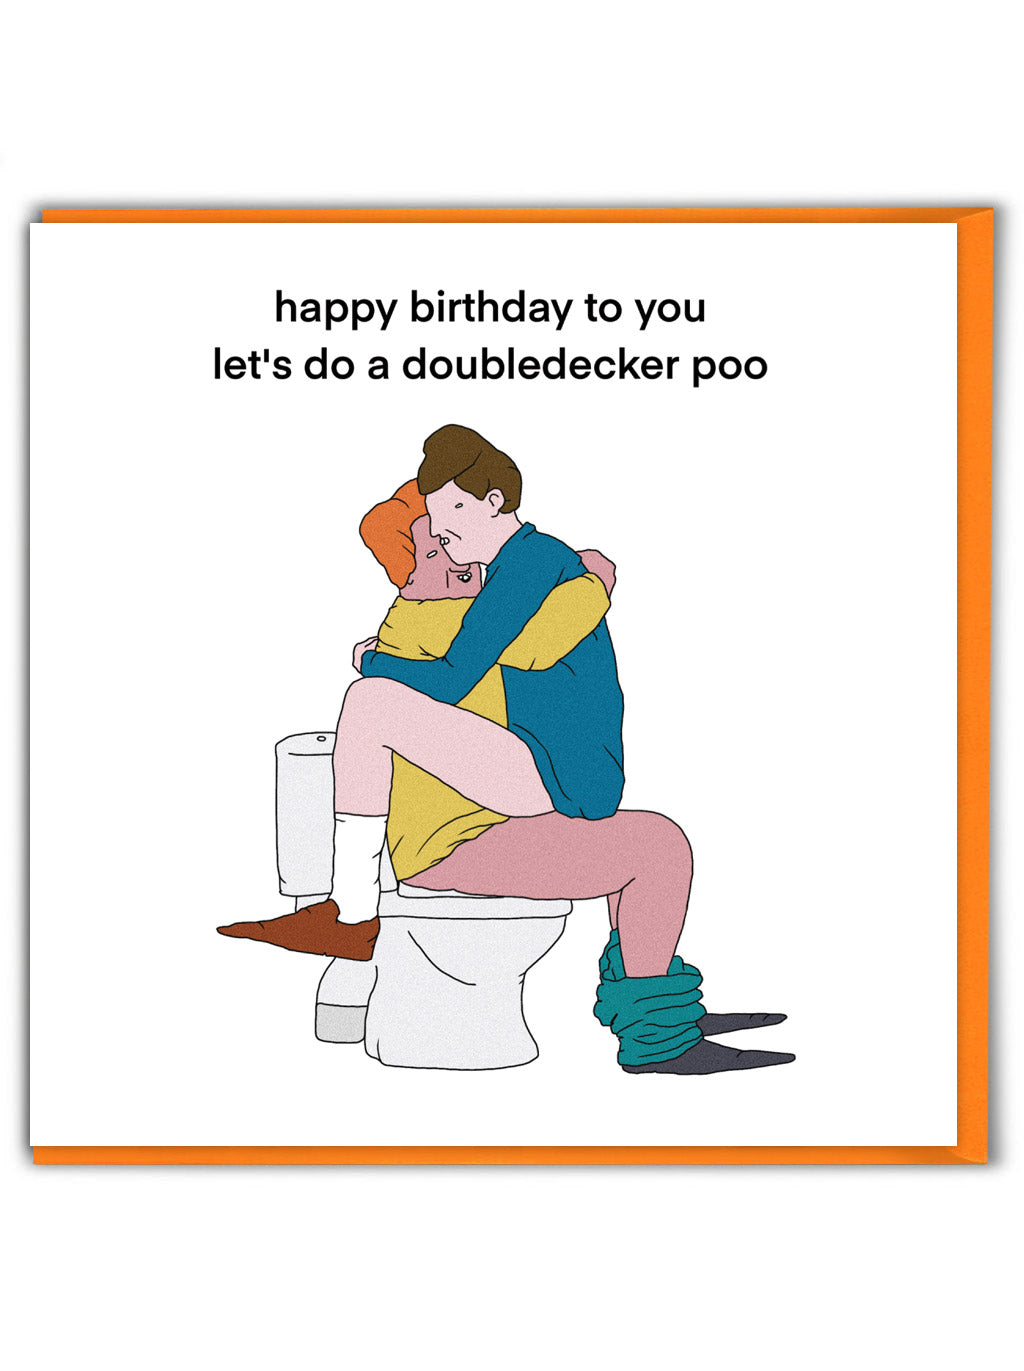 A greetings card with a white background and an illustration of two white people straddling each other on a toilet and the words above them stating &#39;happy birthday to you let&#39;s do a double decker poo&#39;.